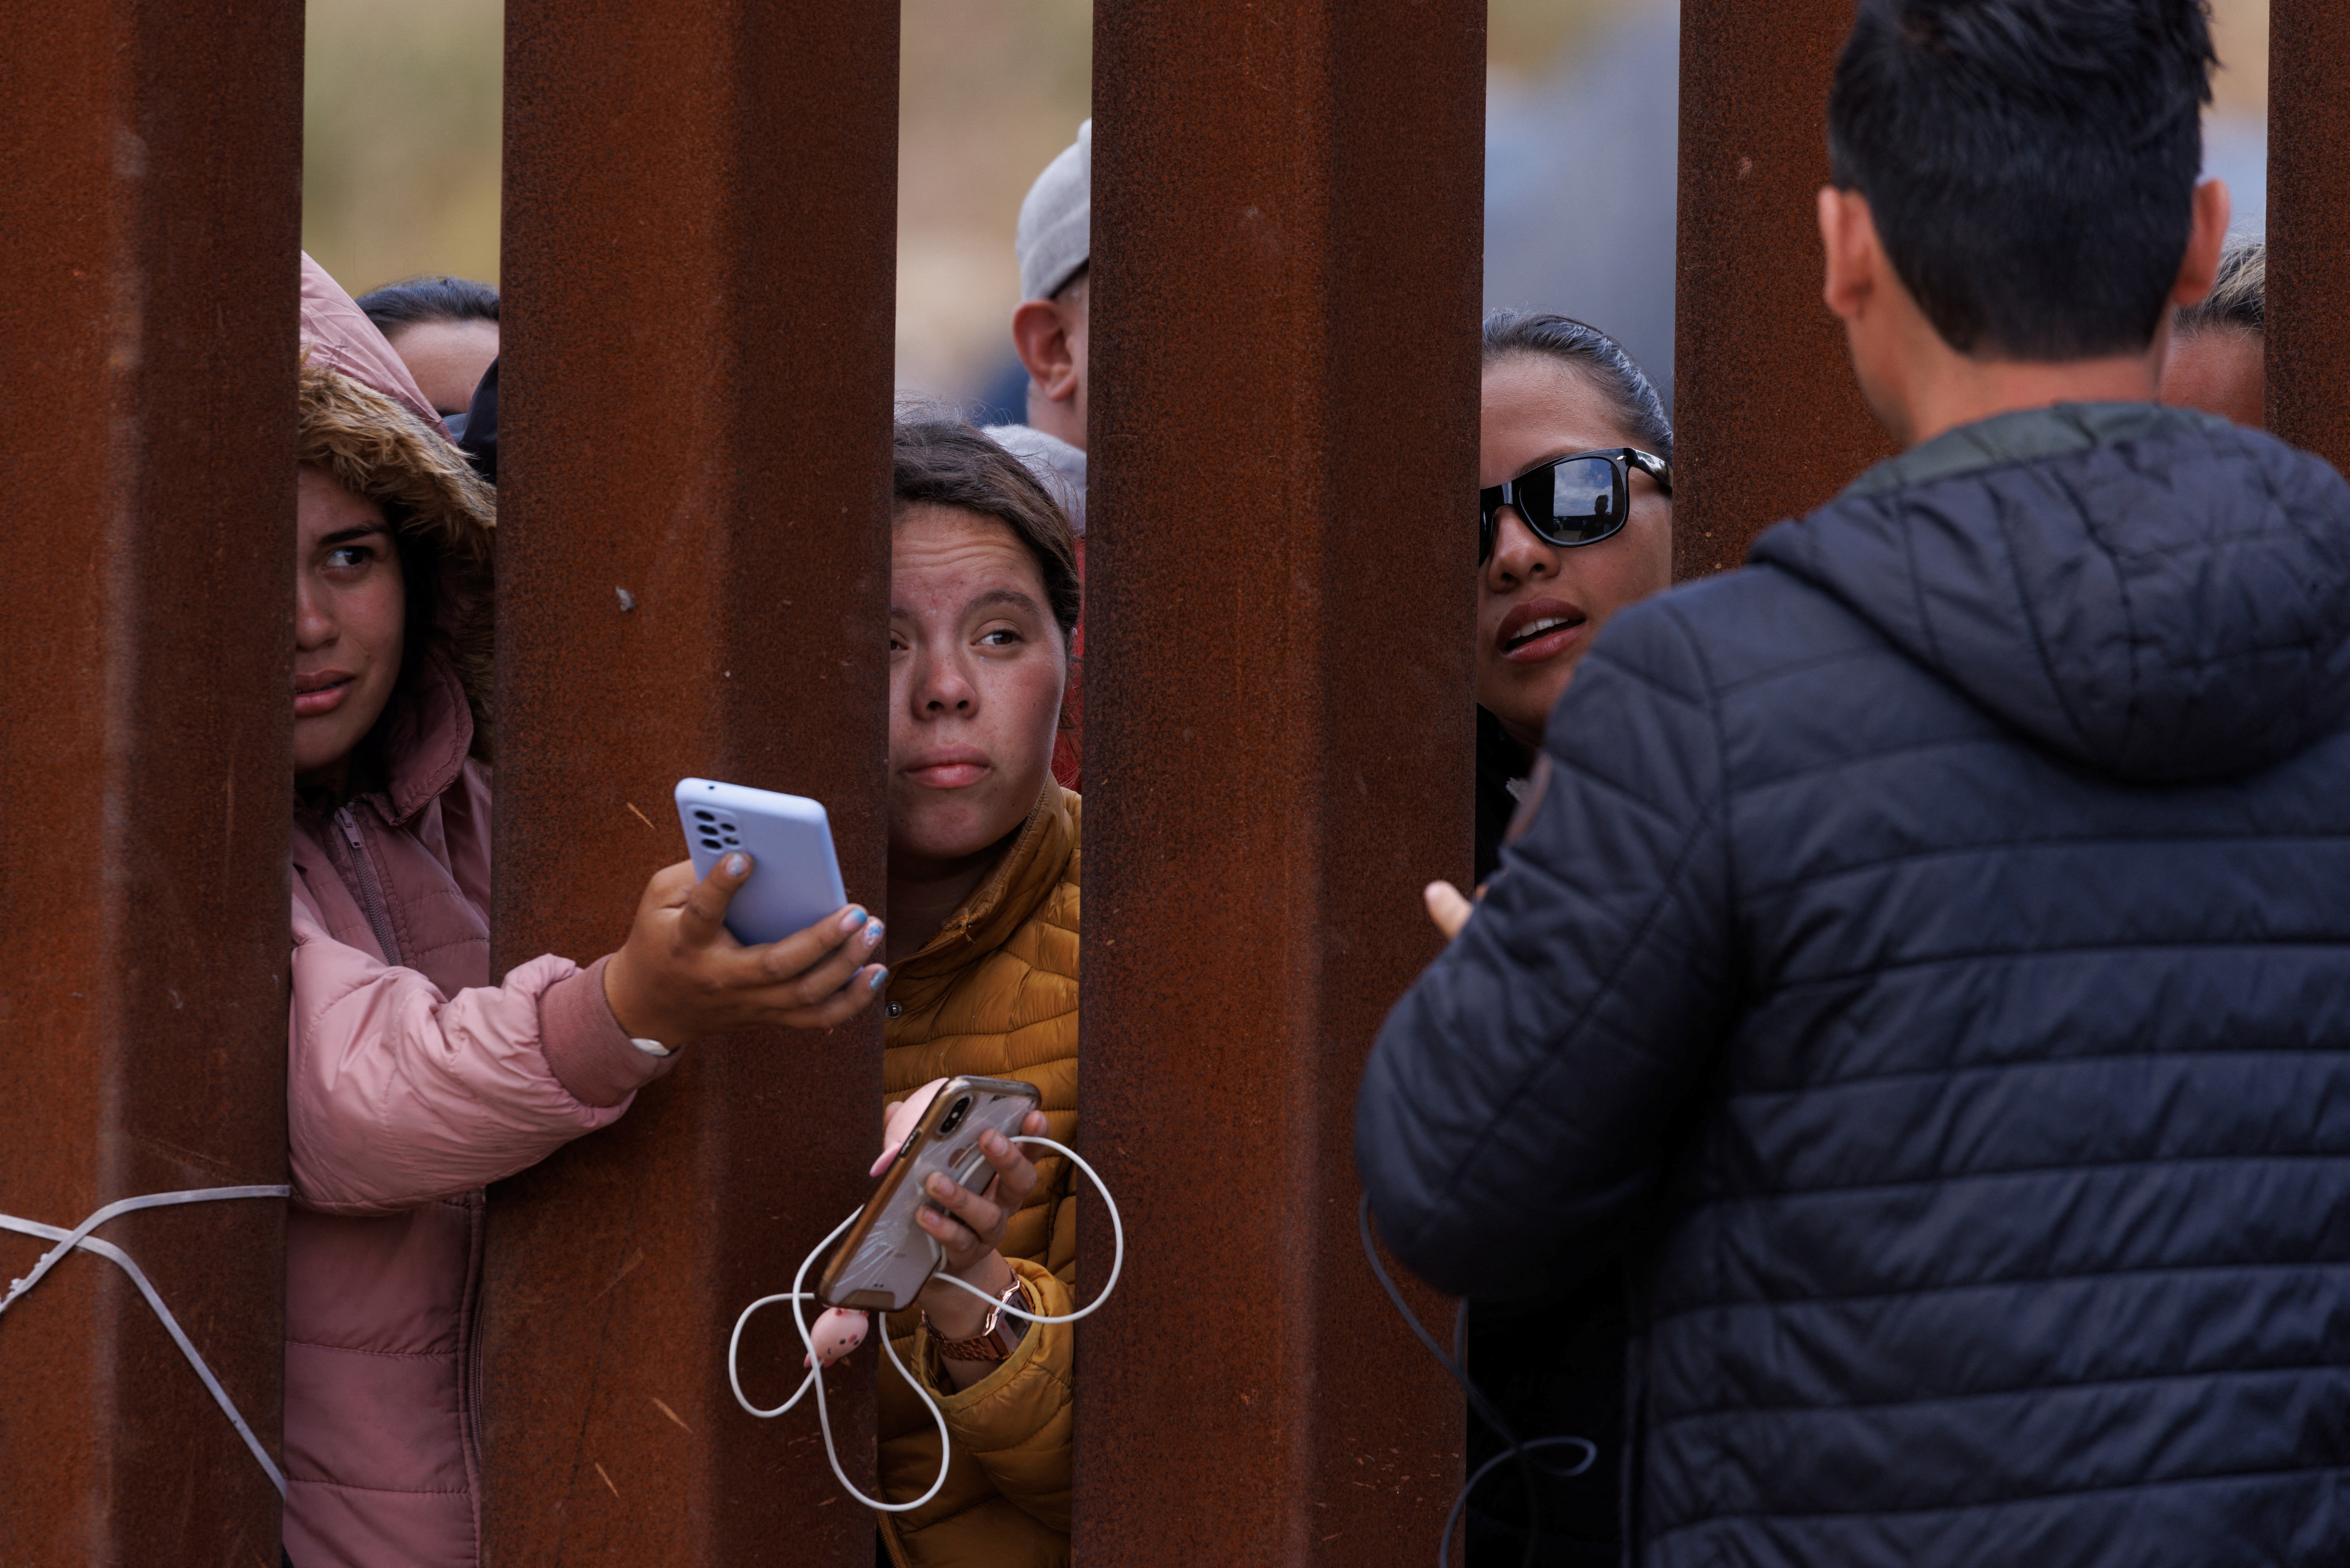 Migrants gather along the U.S. Mexico border near San Diego before the lifting of Tile 42